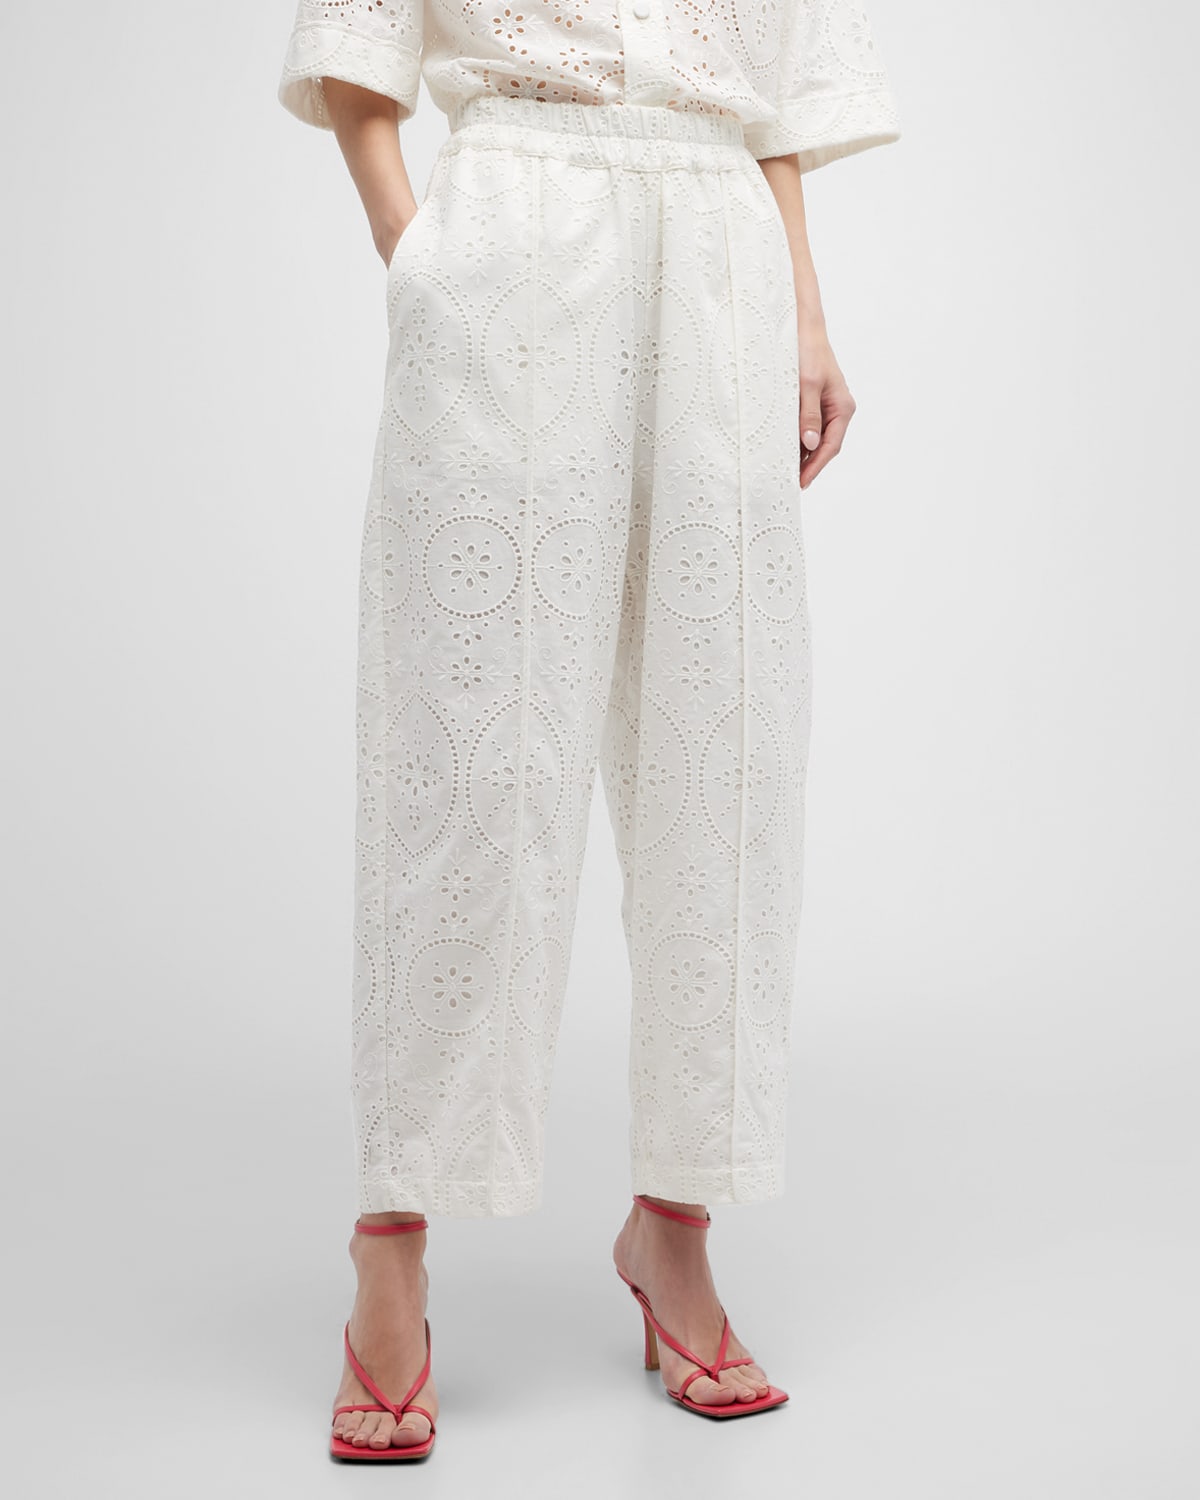 Lya Embroidered Eyelet Cotton Trousers